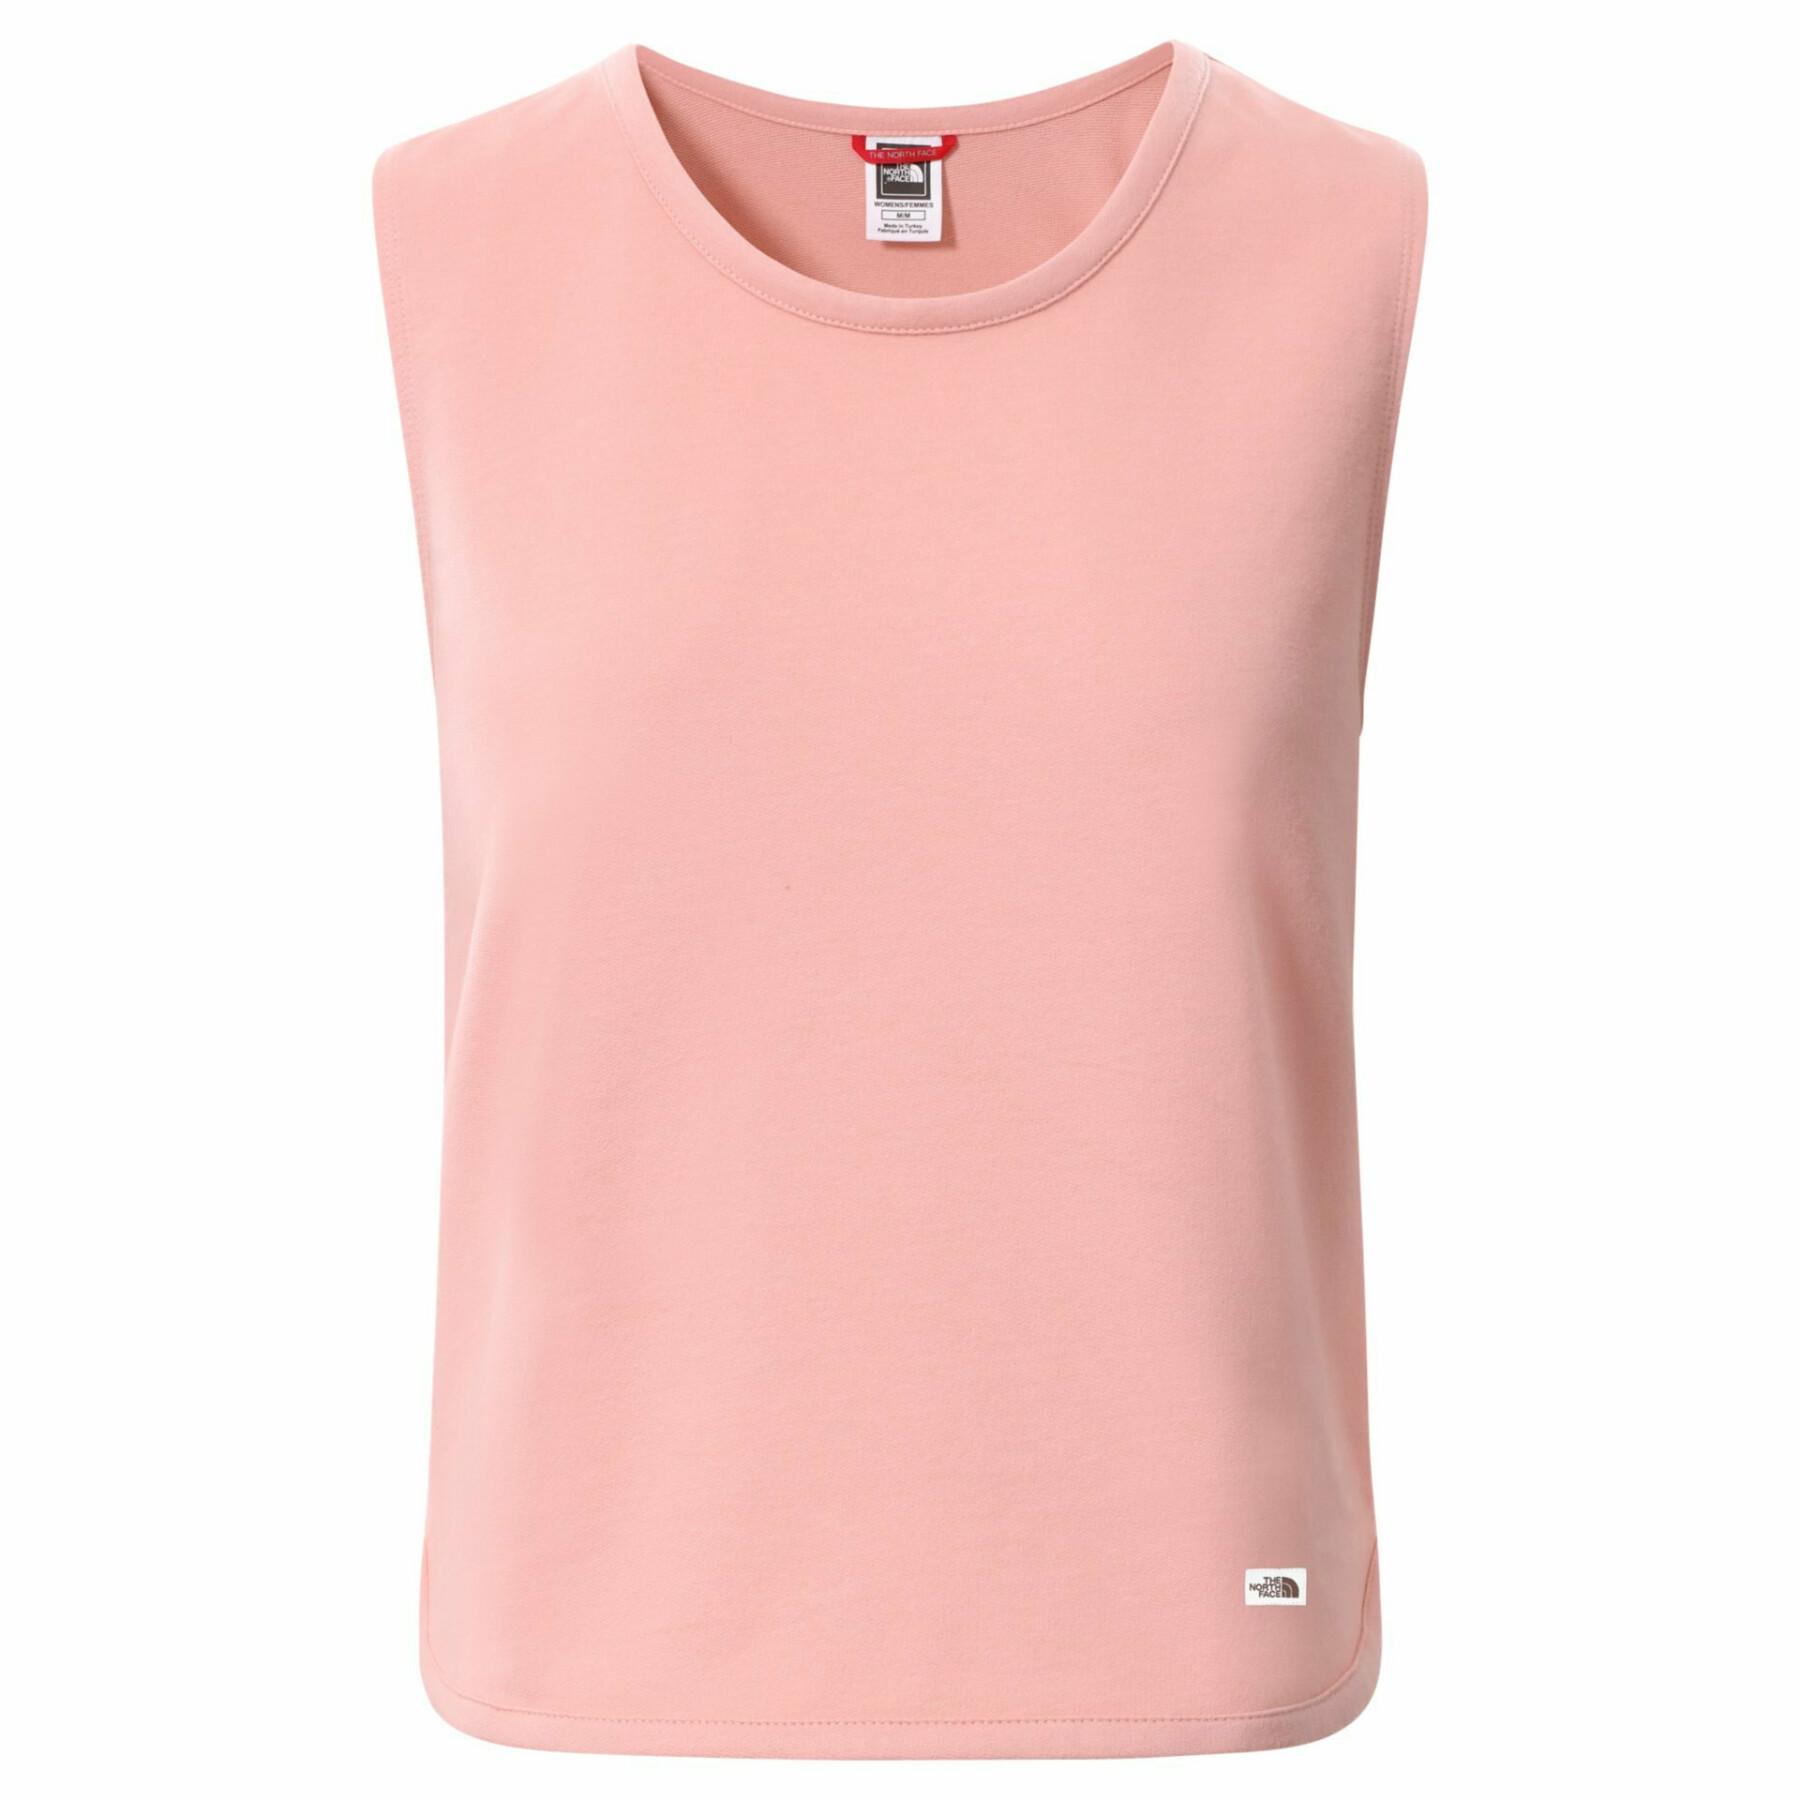 Women's tank top The North Face Heritage Label